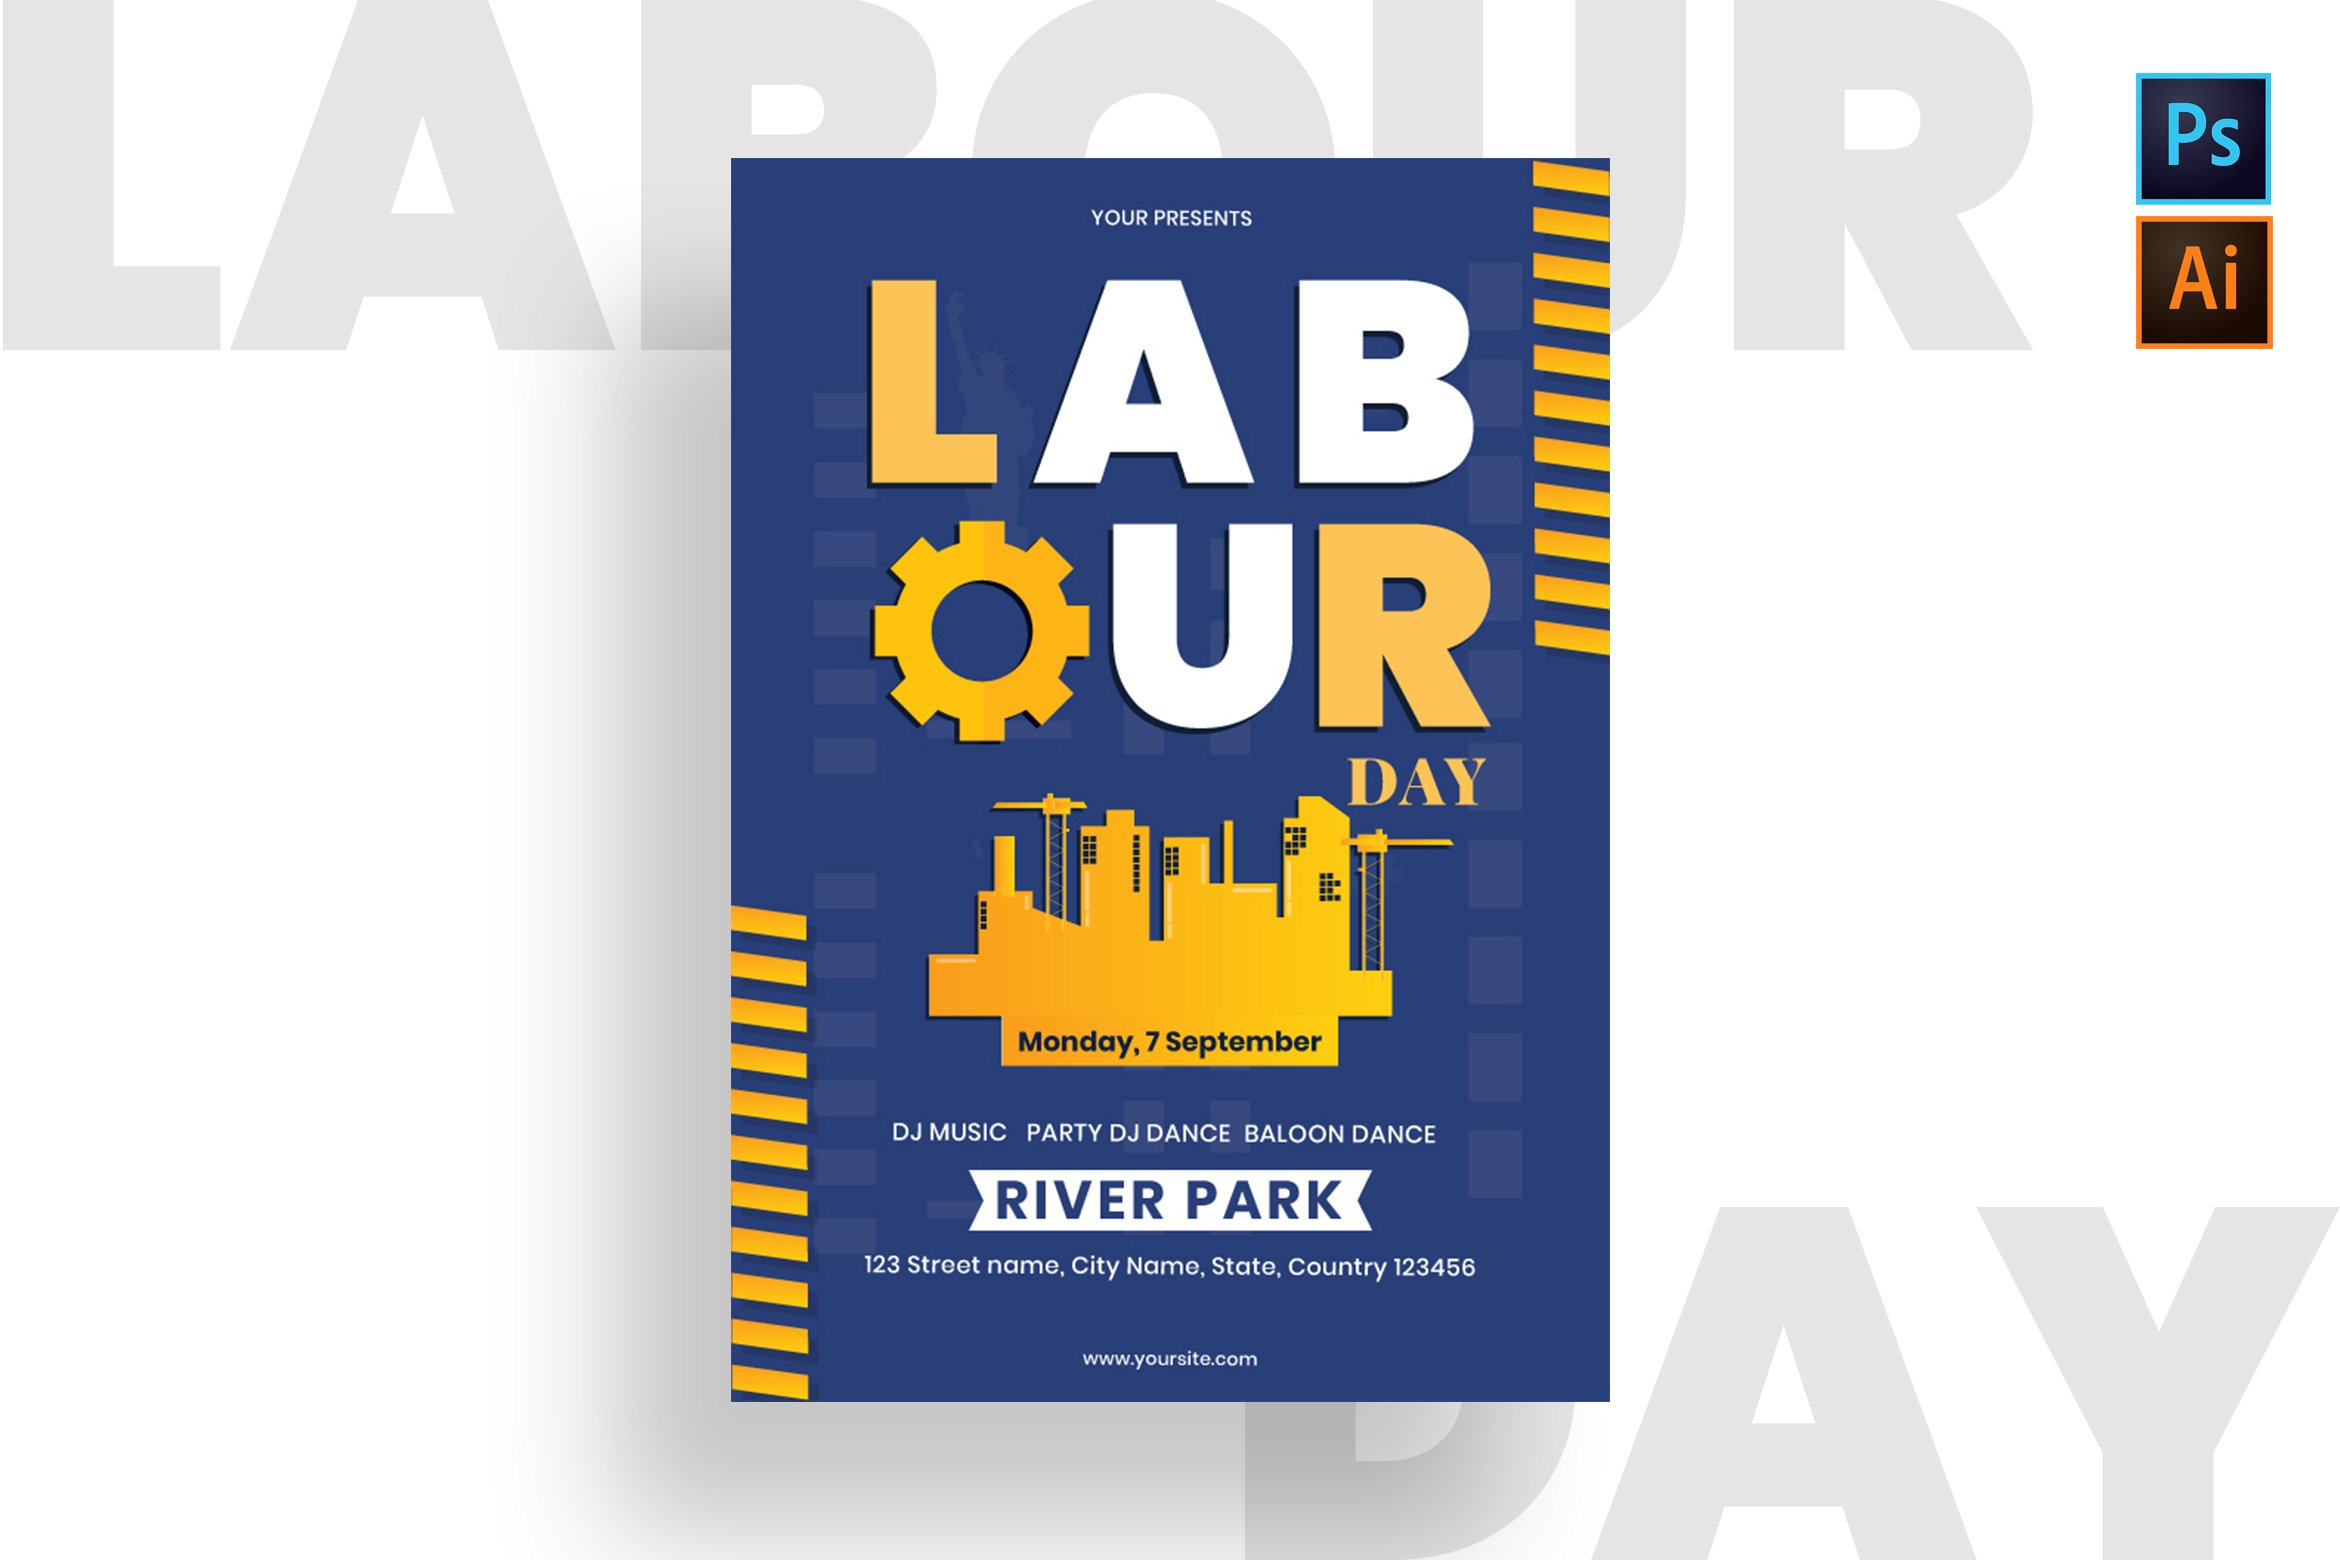 Labour Day Flyer Template